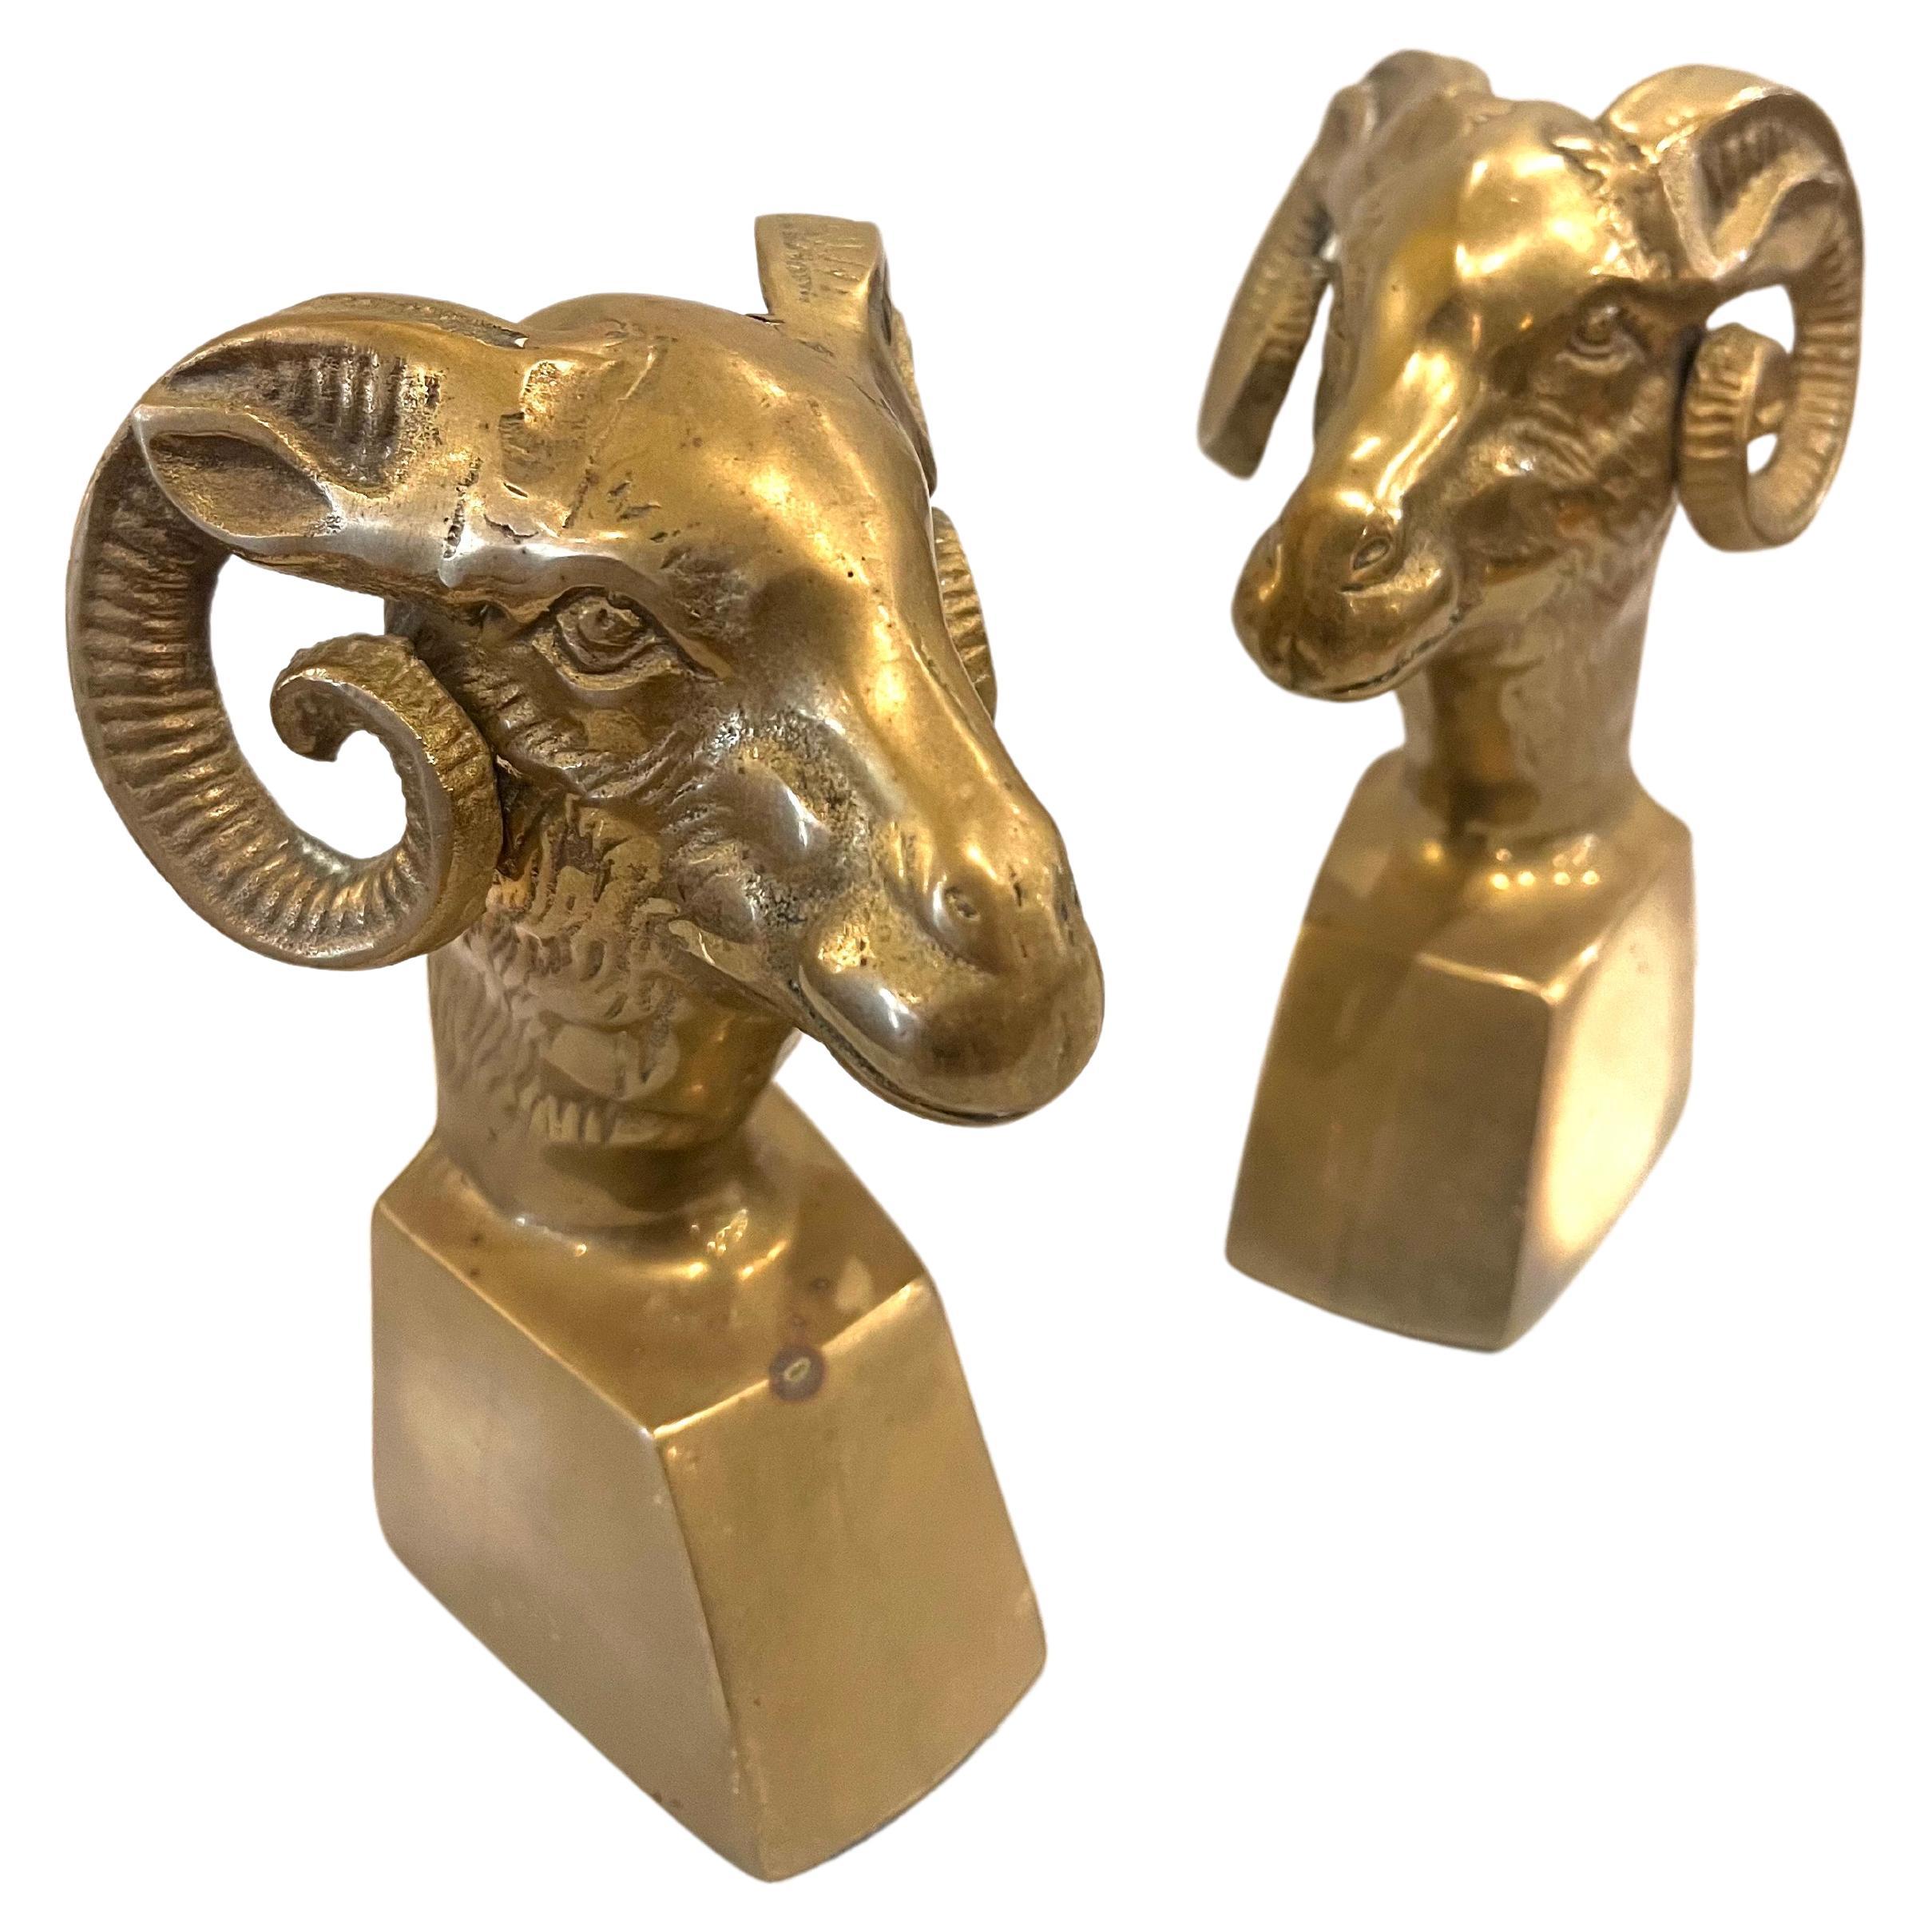 Pair of Patinated Brass Rams Head Bookends, Midcentury